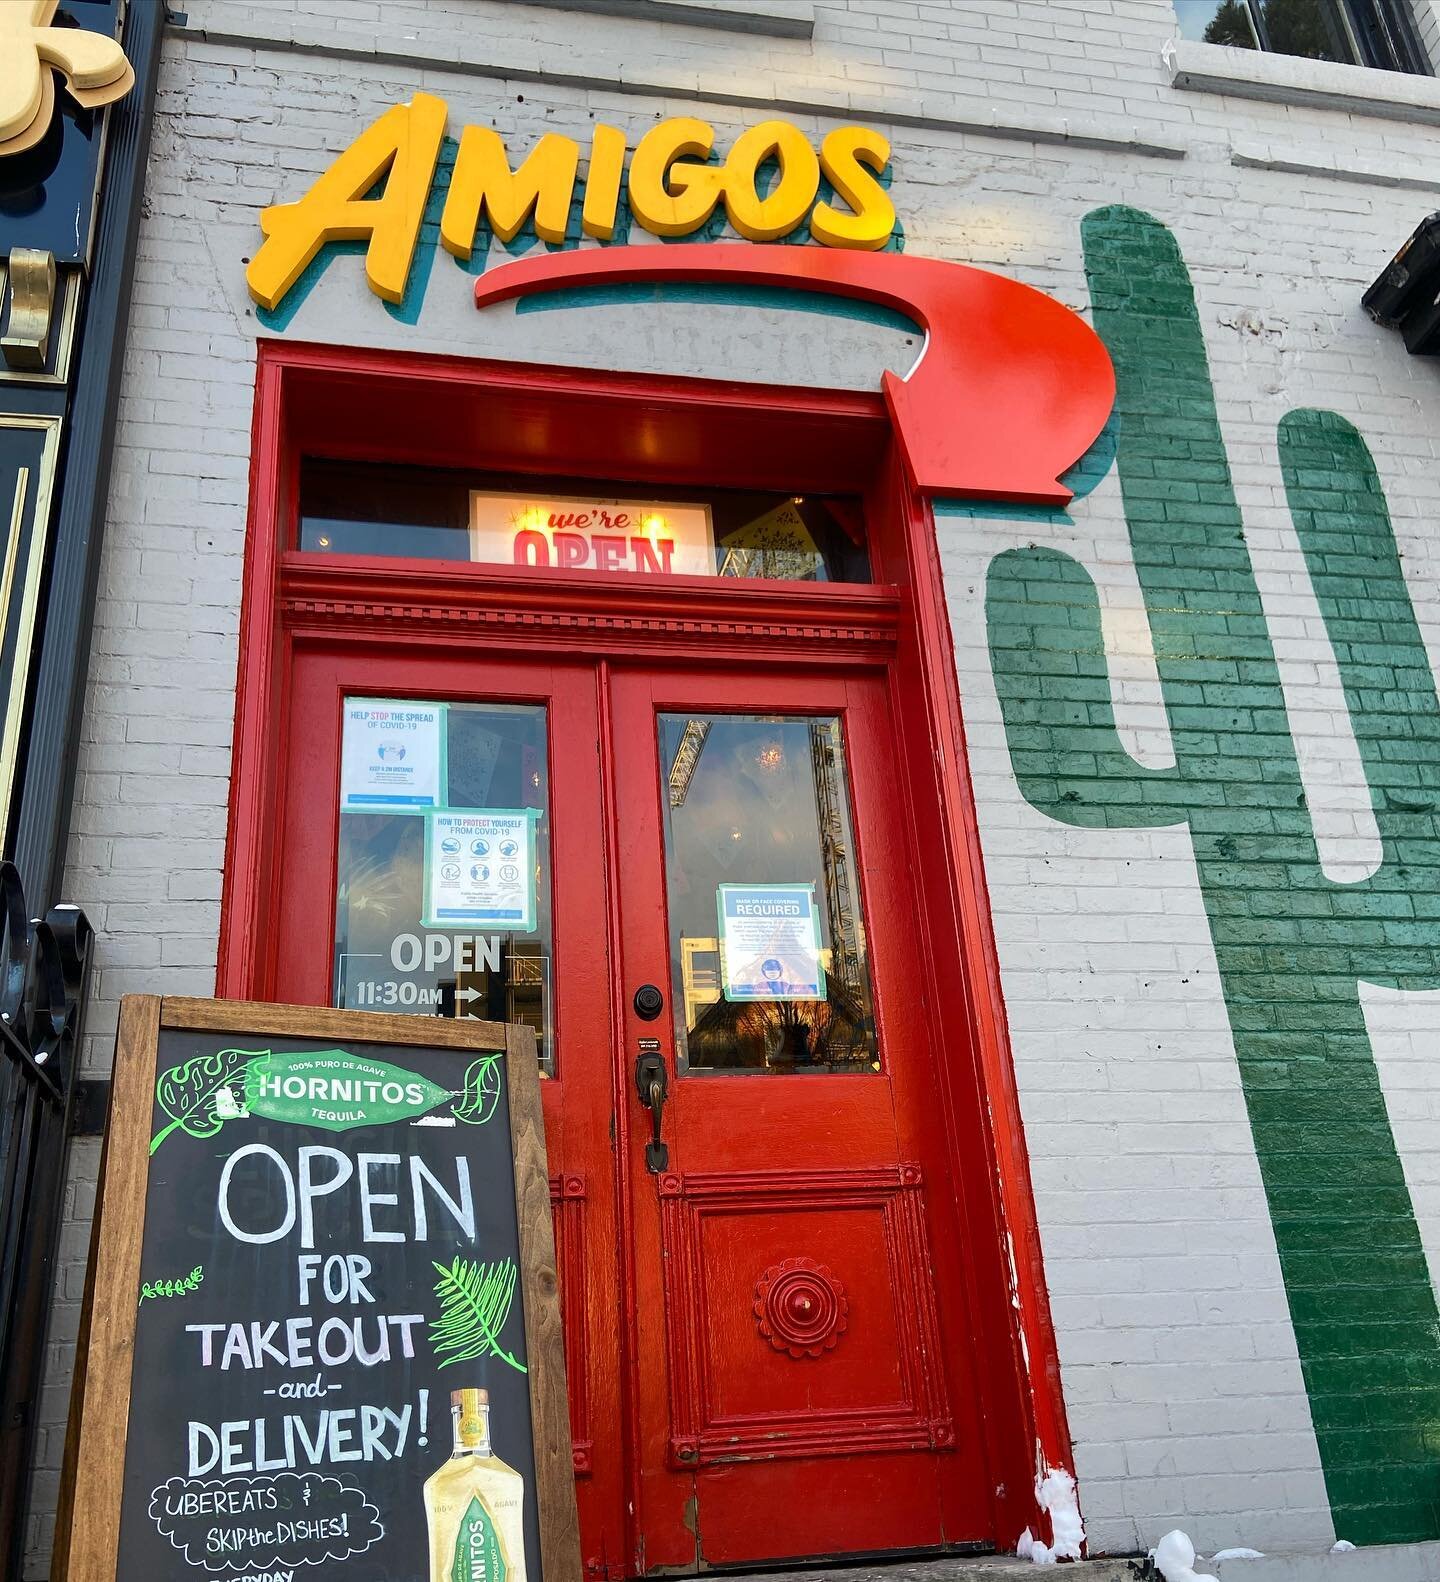 WE&rsquo;RE BACK UP AND RUNNING TODAY!🌮

We&rsquo;ll be open 5-11pm today! 
Delivery available on UberEats &amp; SkipTheDishes or give us a call for takeout! 
(905)267-1532
.
.
.
.
.
.
.
.
.
#amigoshamont #texmex #texmexfood #hamont #hamonteats #ham